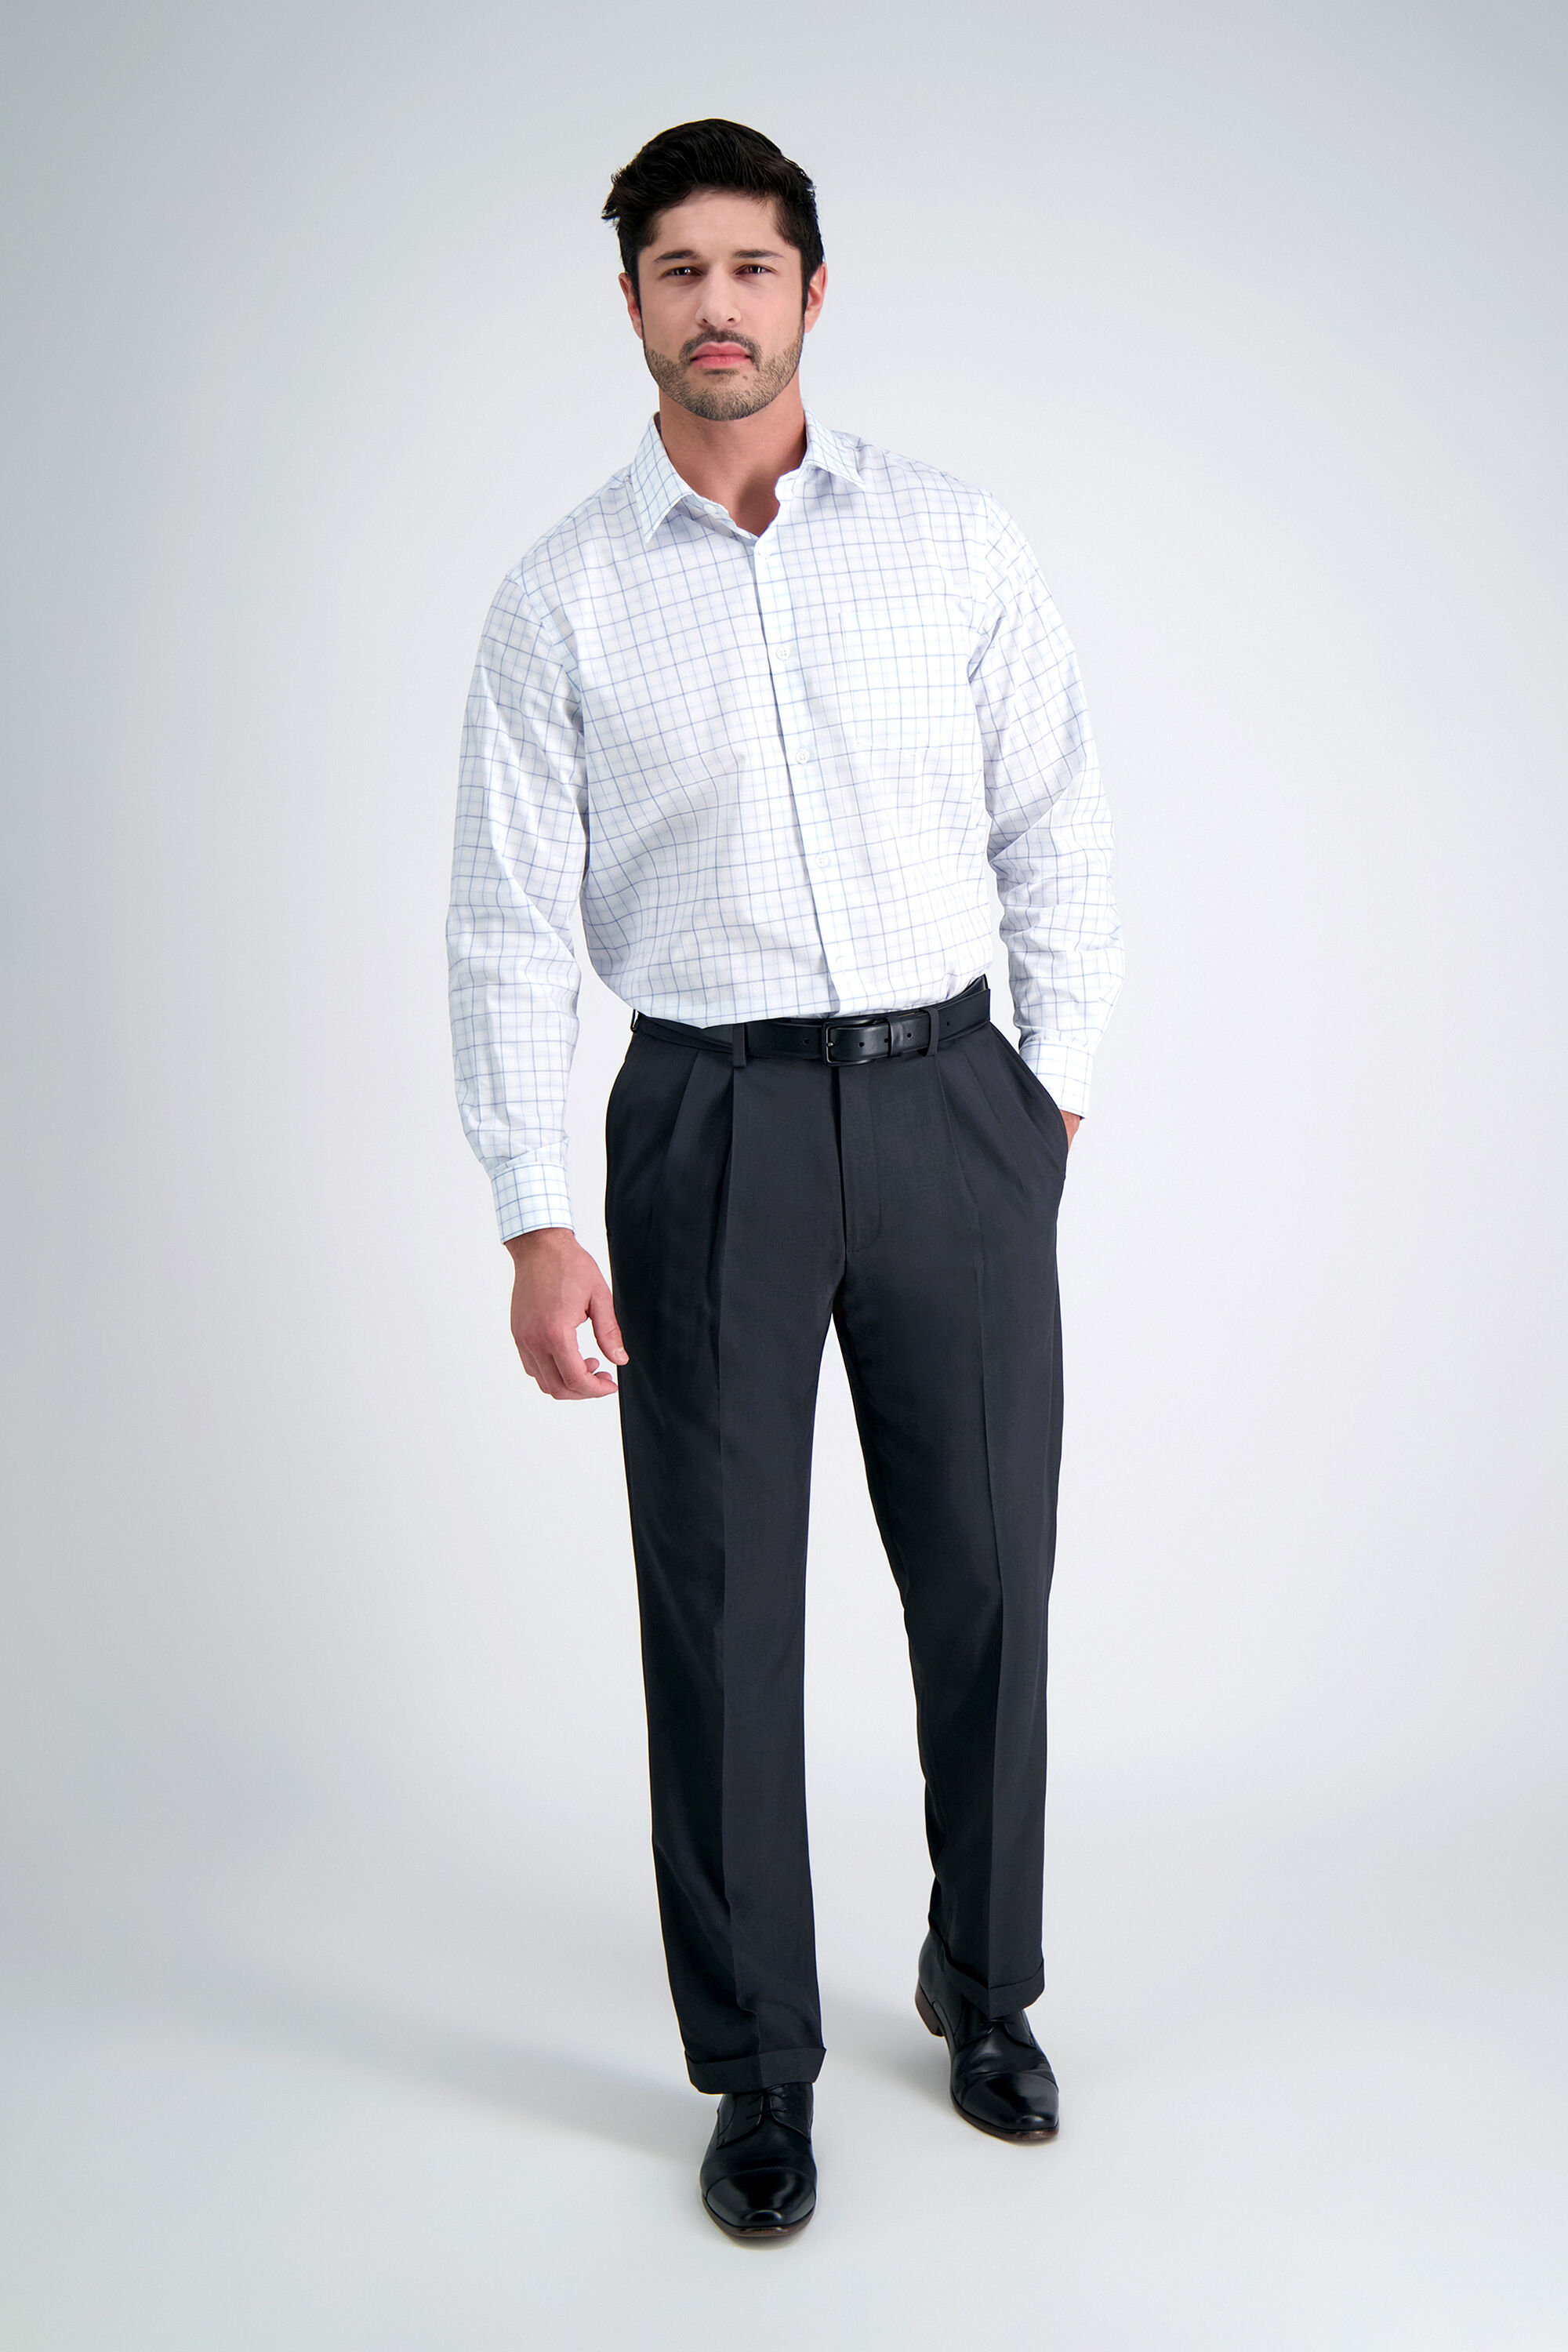 Classic Fit Pant Styles | Haggar